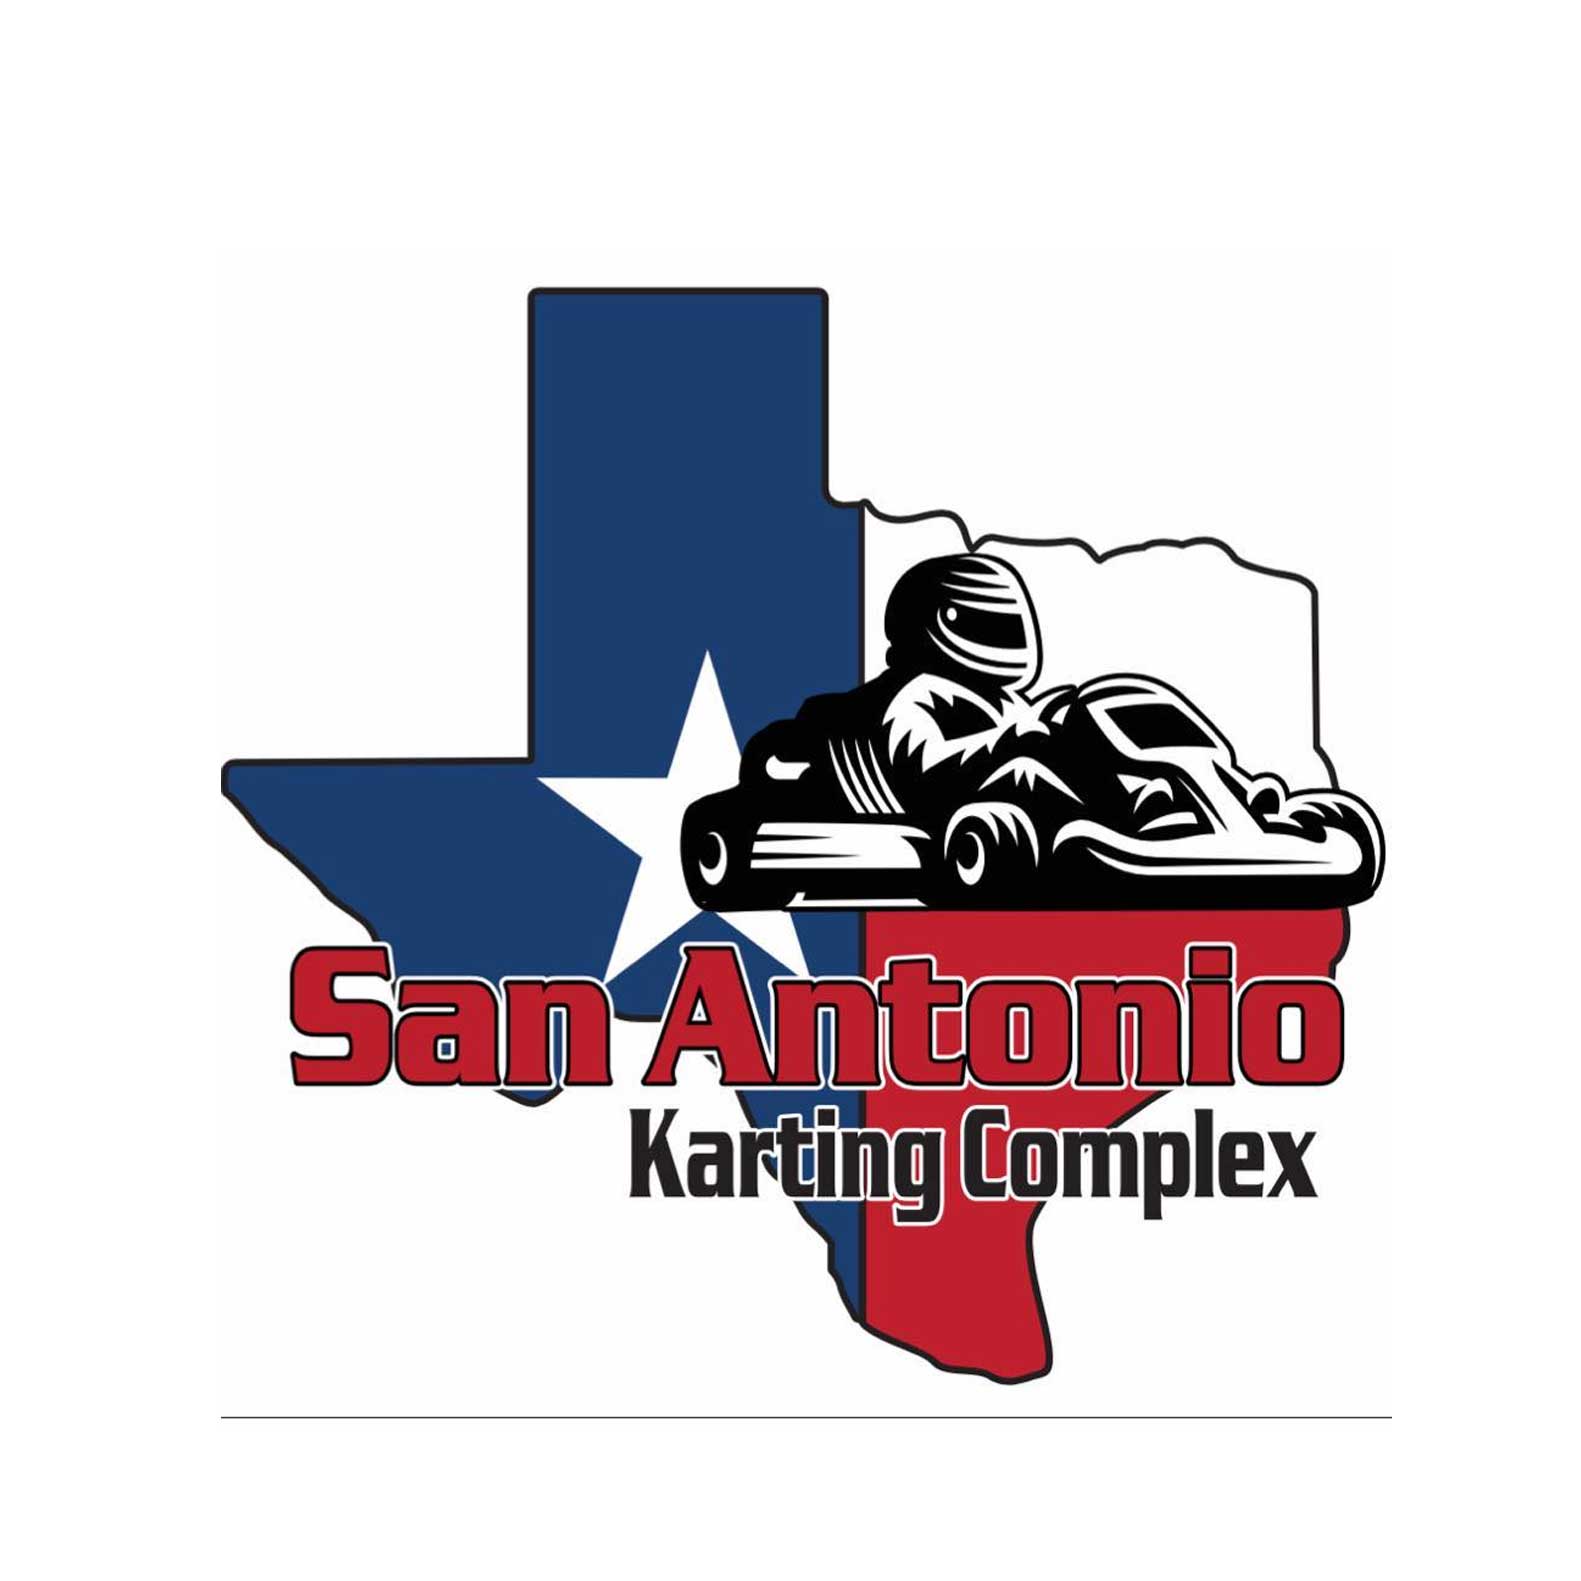 San Antonio Karting recommends dabow payment solutions